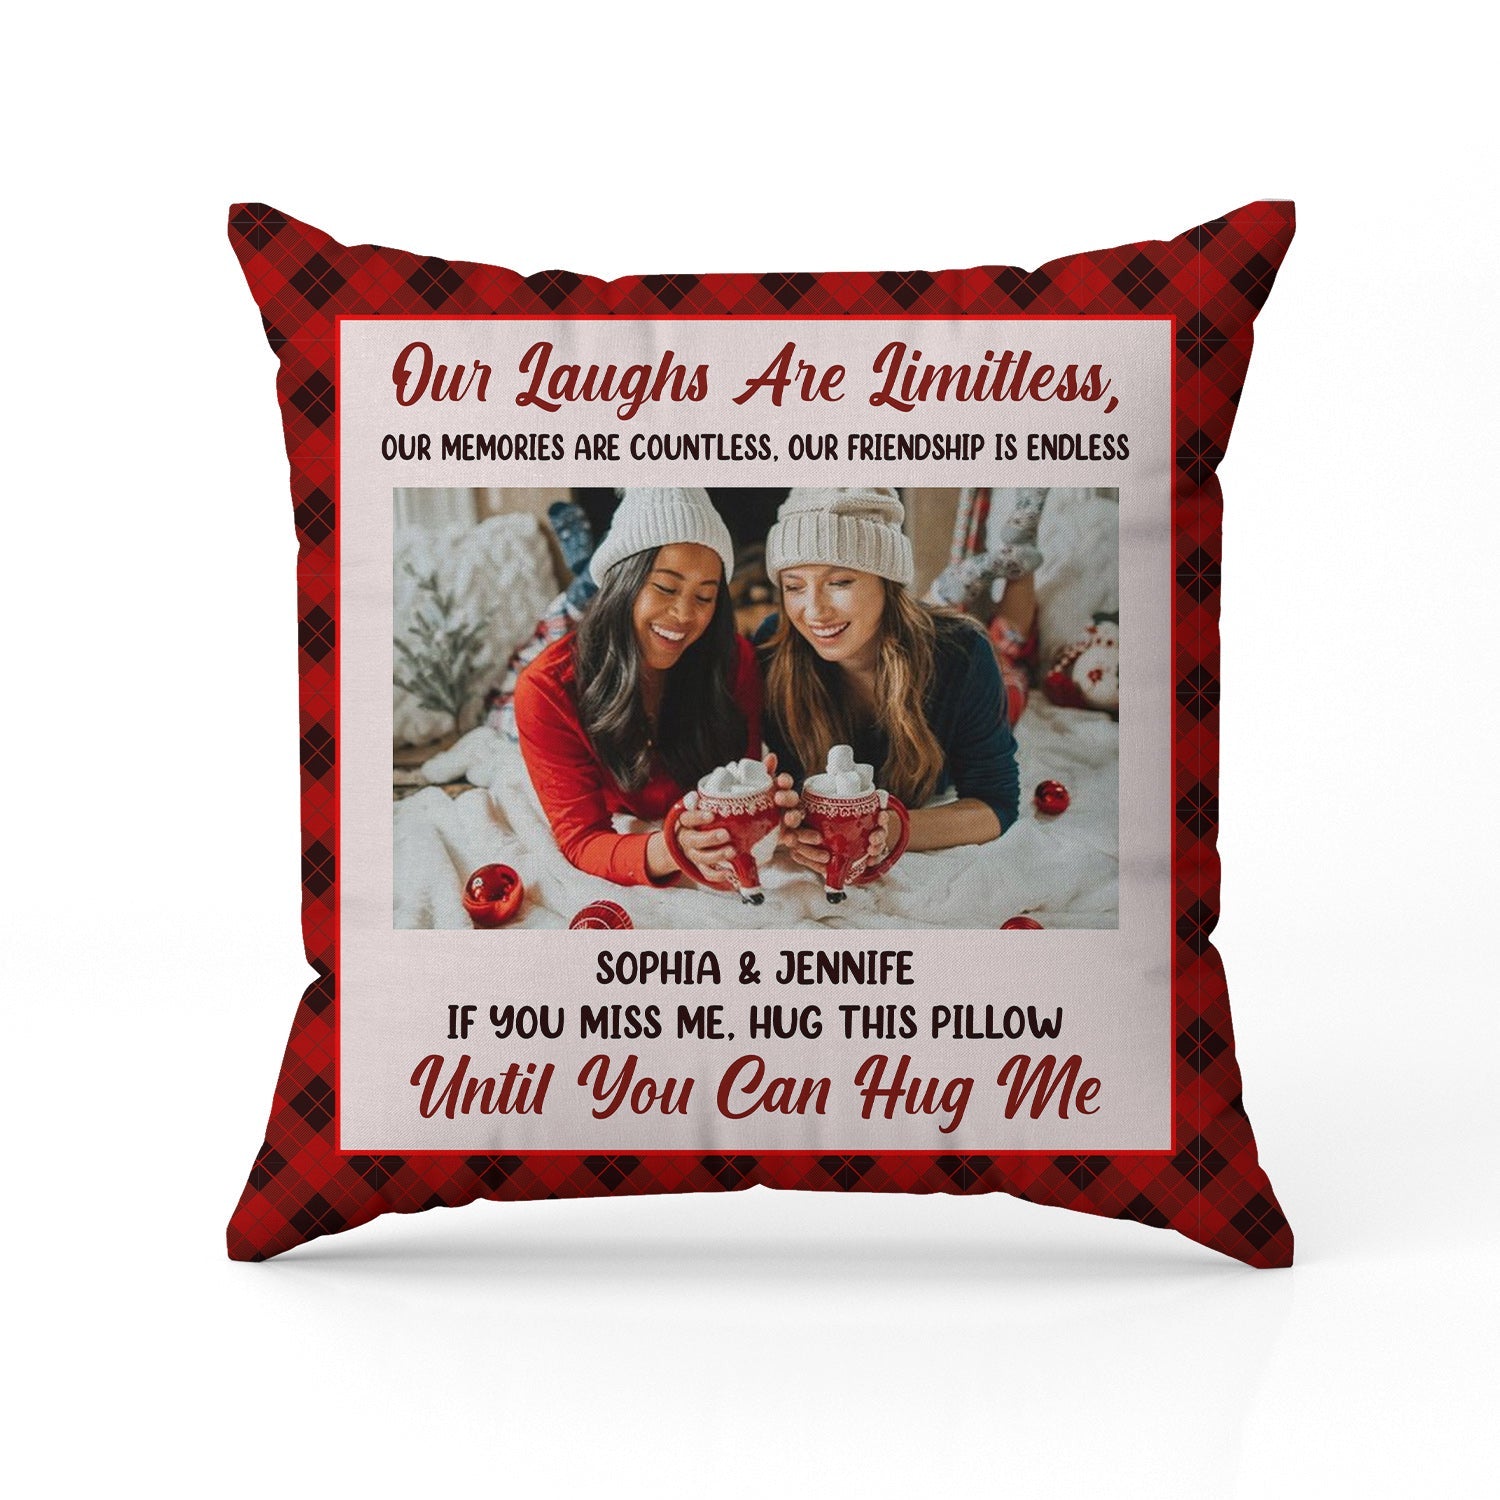 Our Friendship Is Endless - Personalized Christmas gift For Long Distance Friend - Custom Pillow - MyMindfulGifts